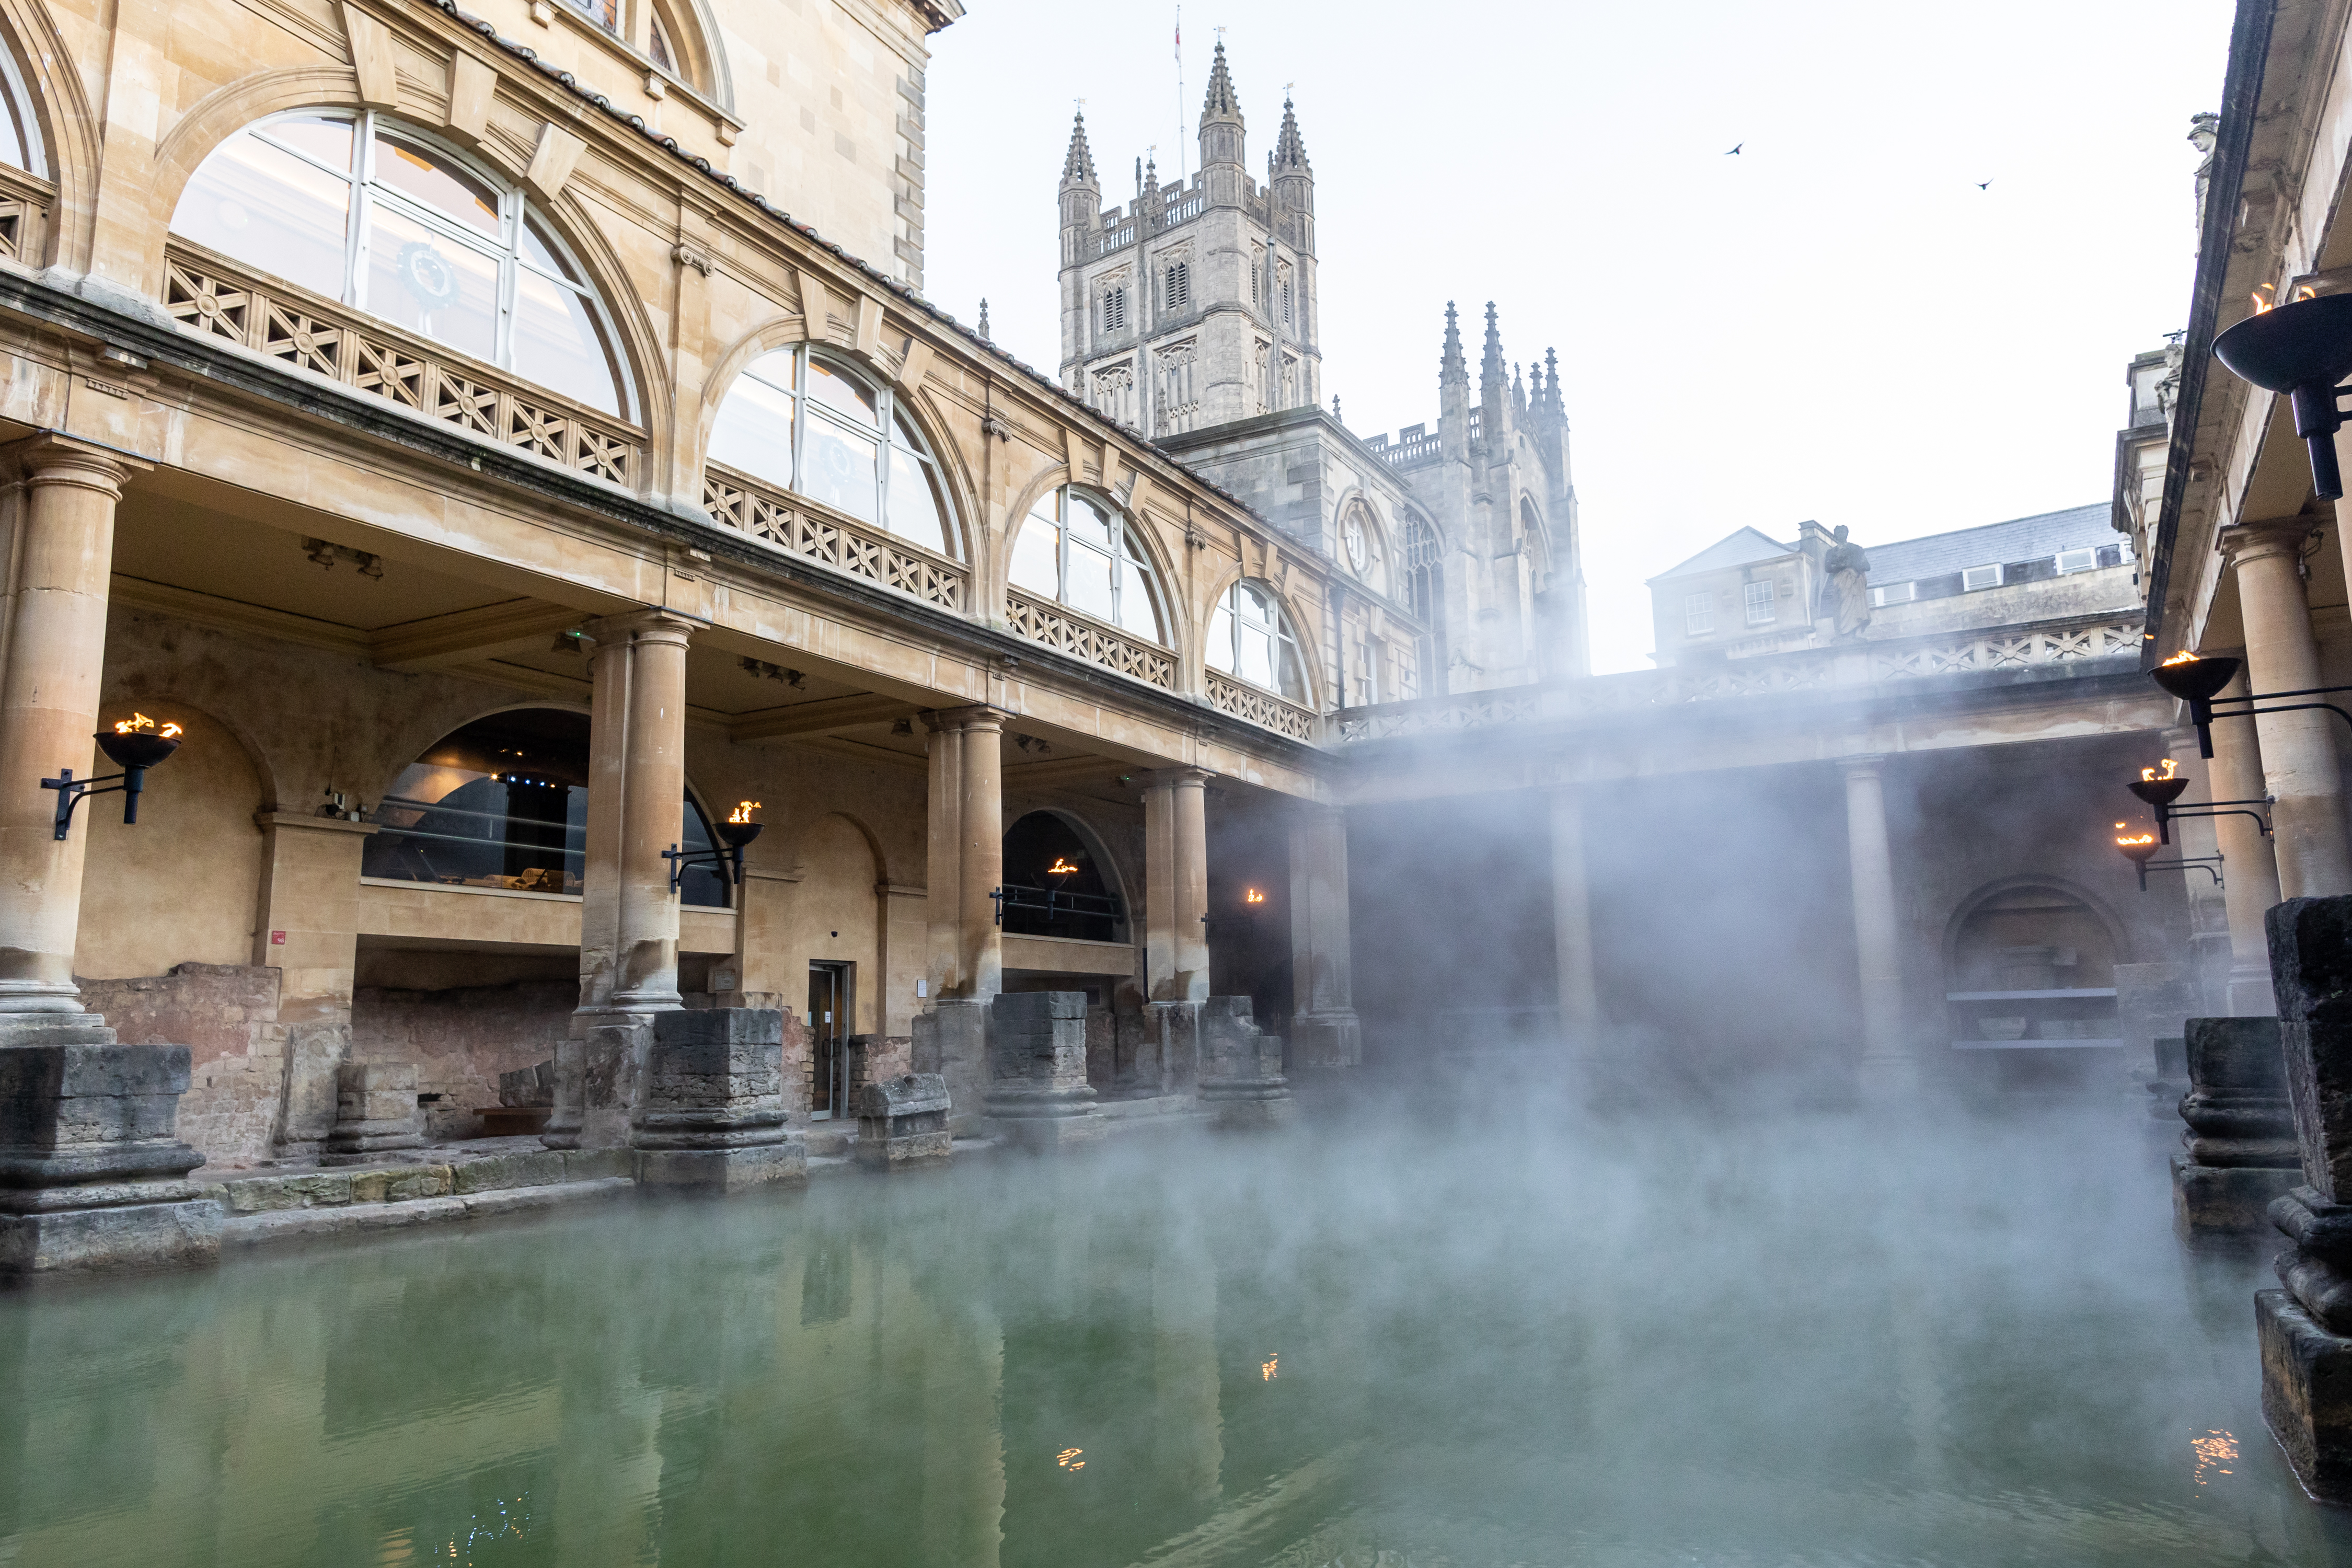 The Great Bath with steam